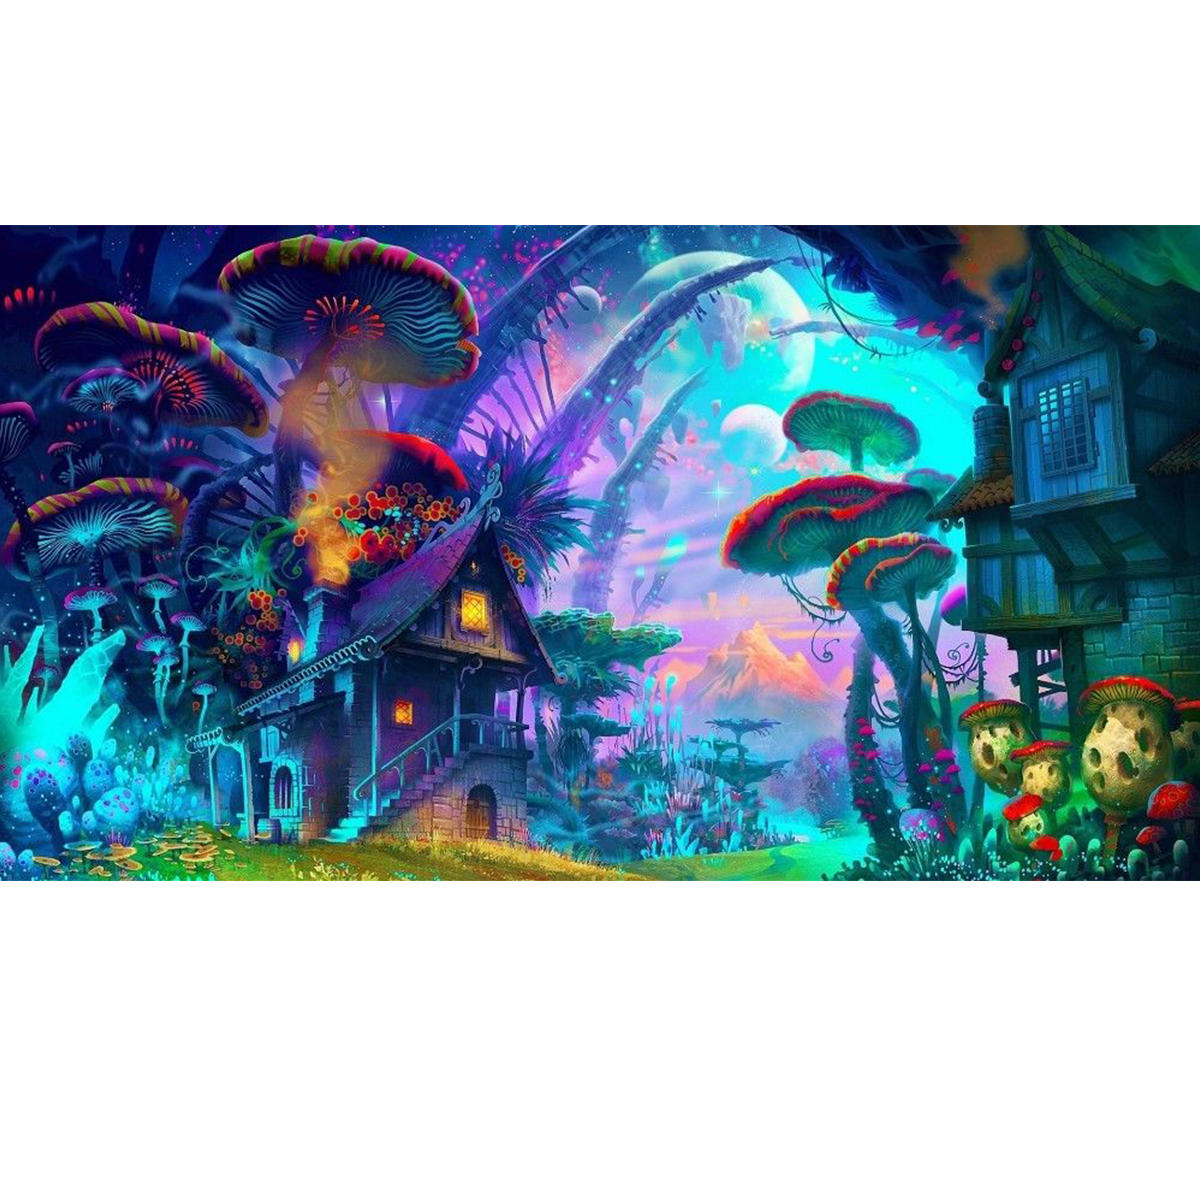 

24x36'' Psychedelic Mushroom Town Art Print Fabric Silk Poster Wall Home Decorations